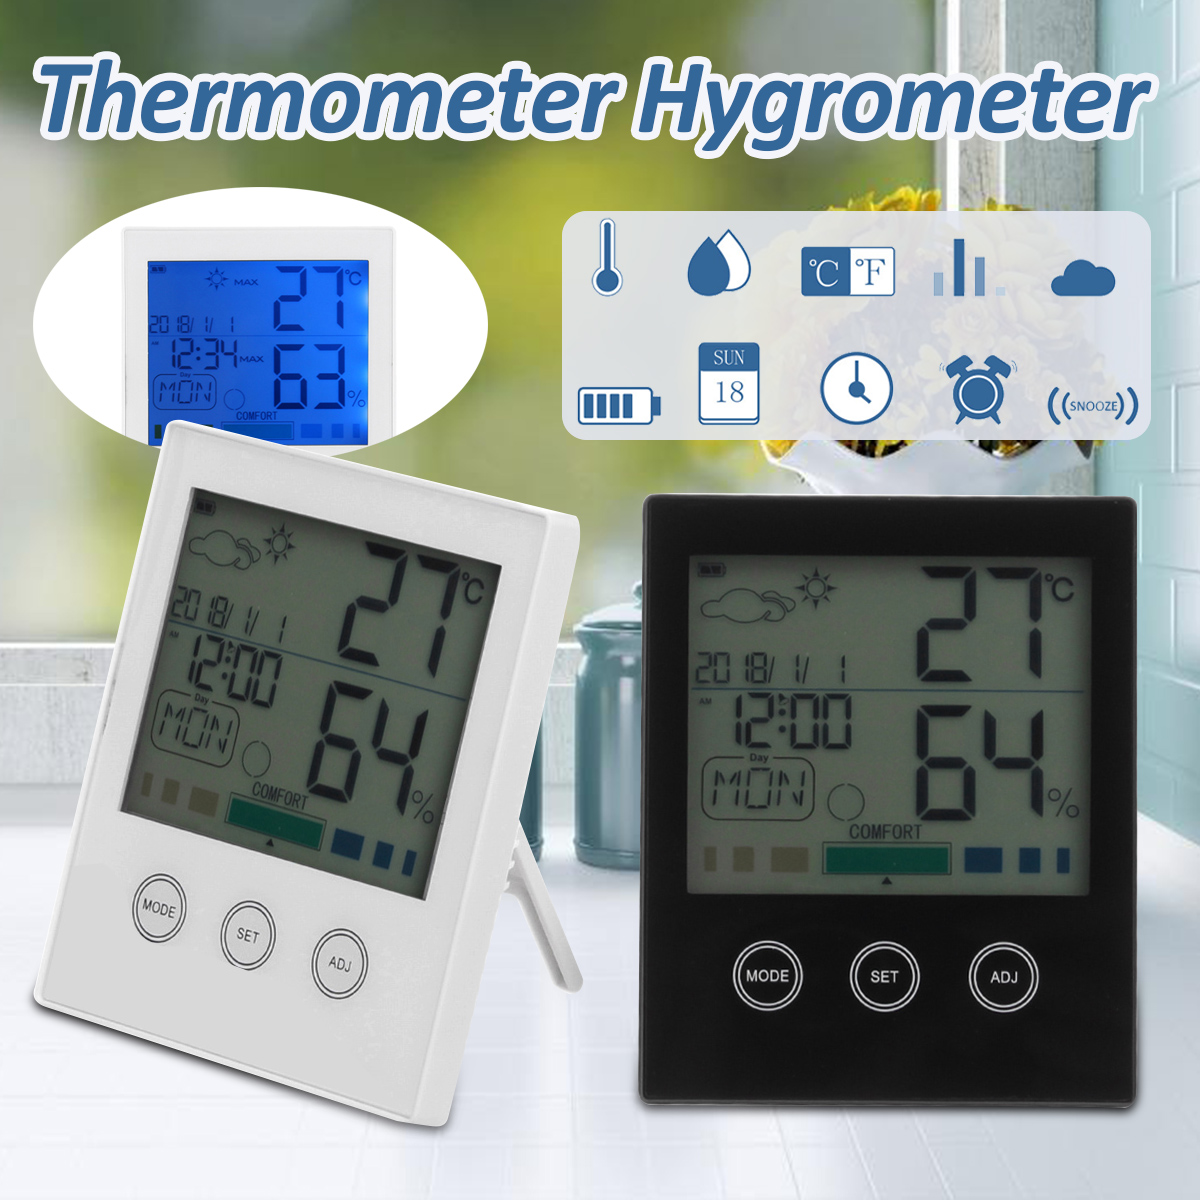 CH-909-Large-LCD-Digital-Thermometer-Hygrometer-Temperature-Humidity-Gauge-Alarm-Clock-Thermometer-1335367-2